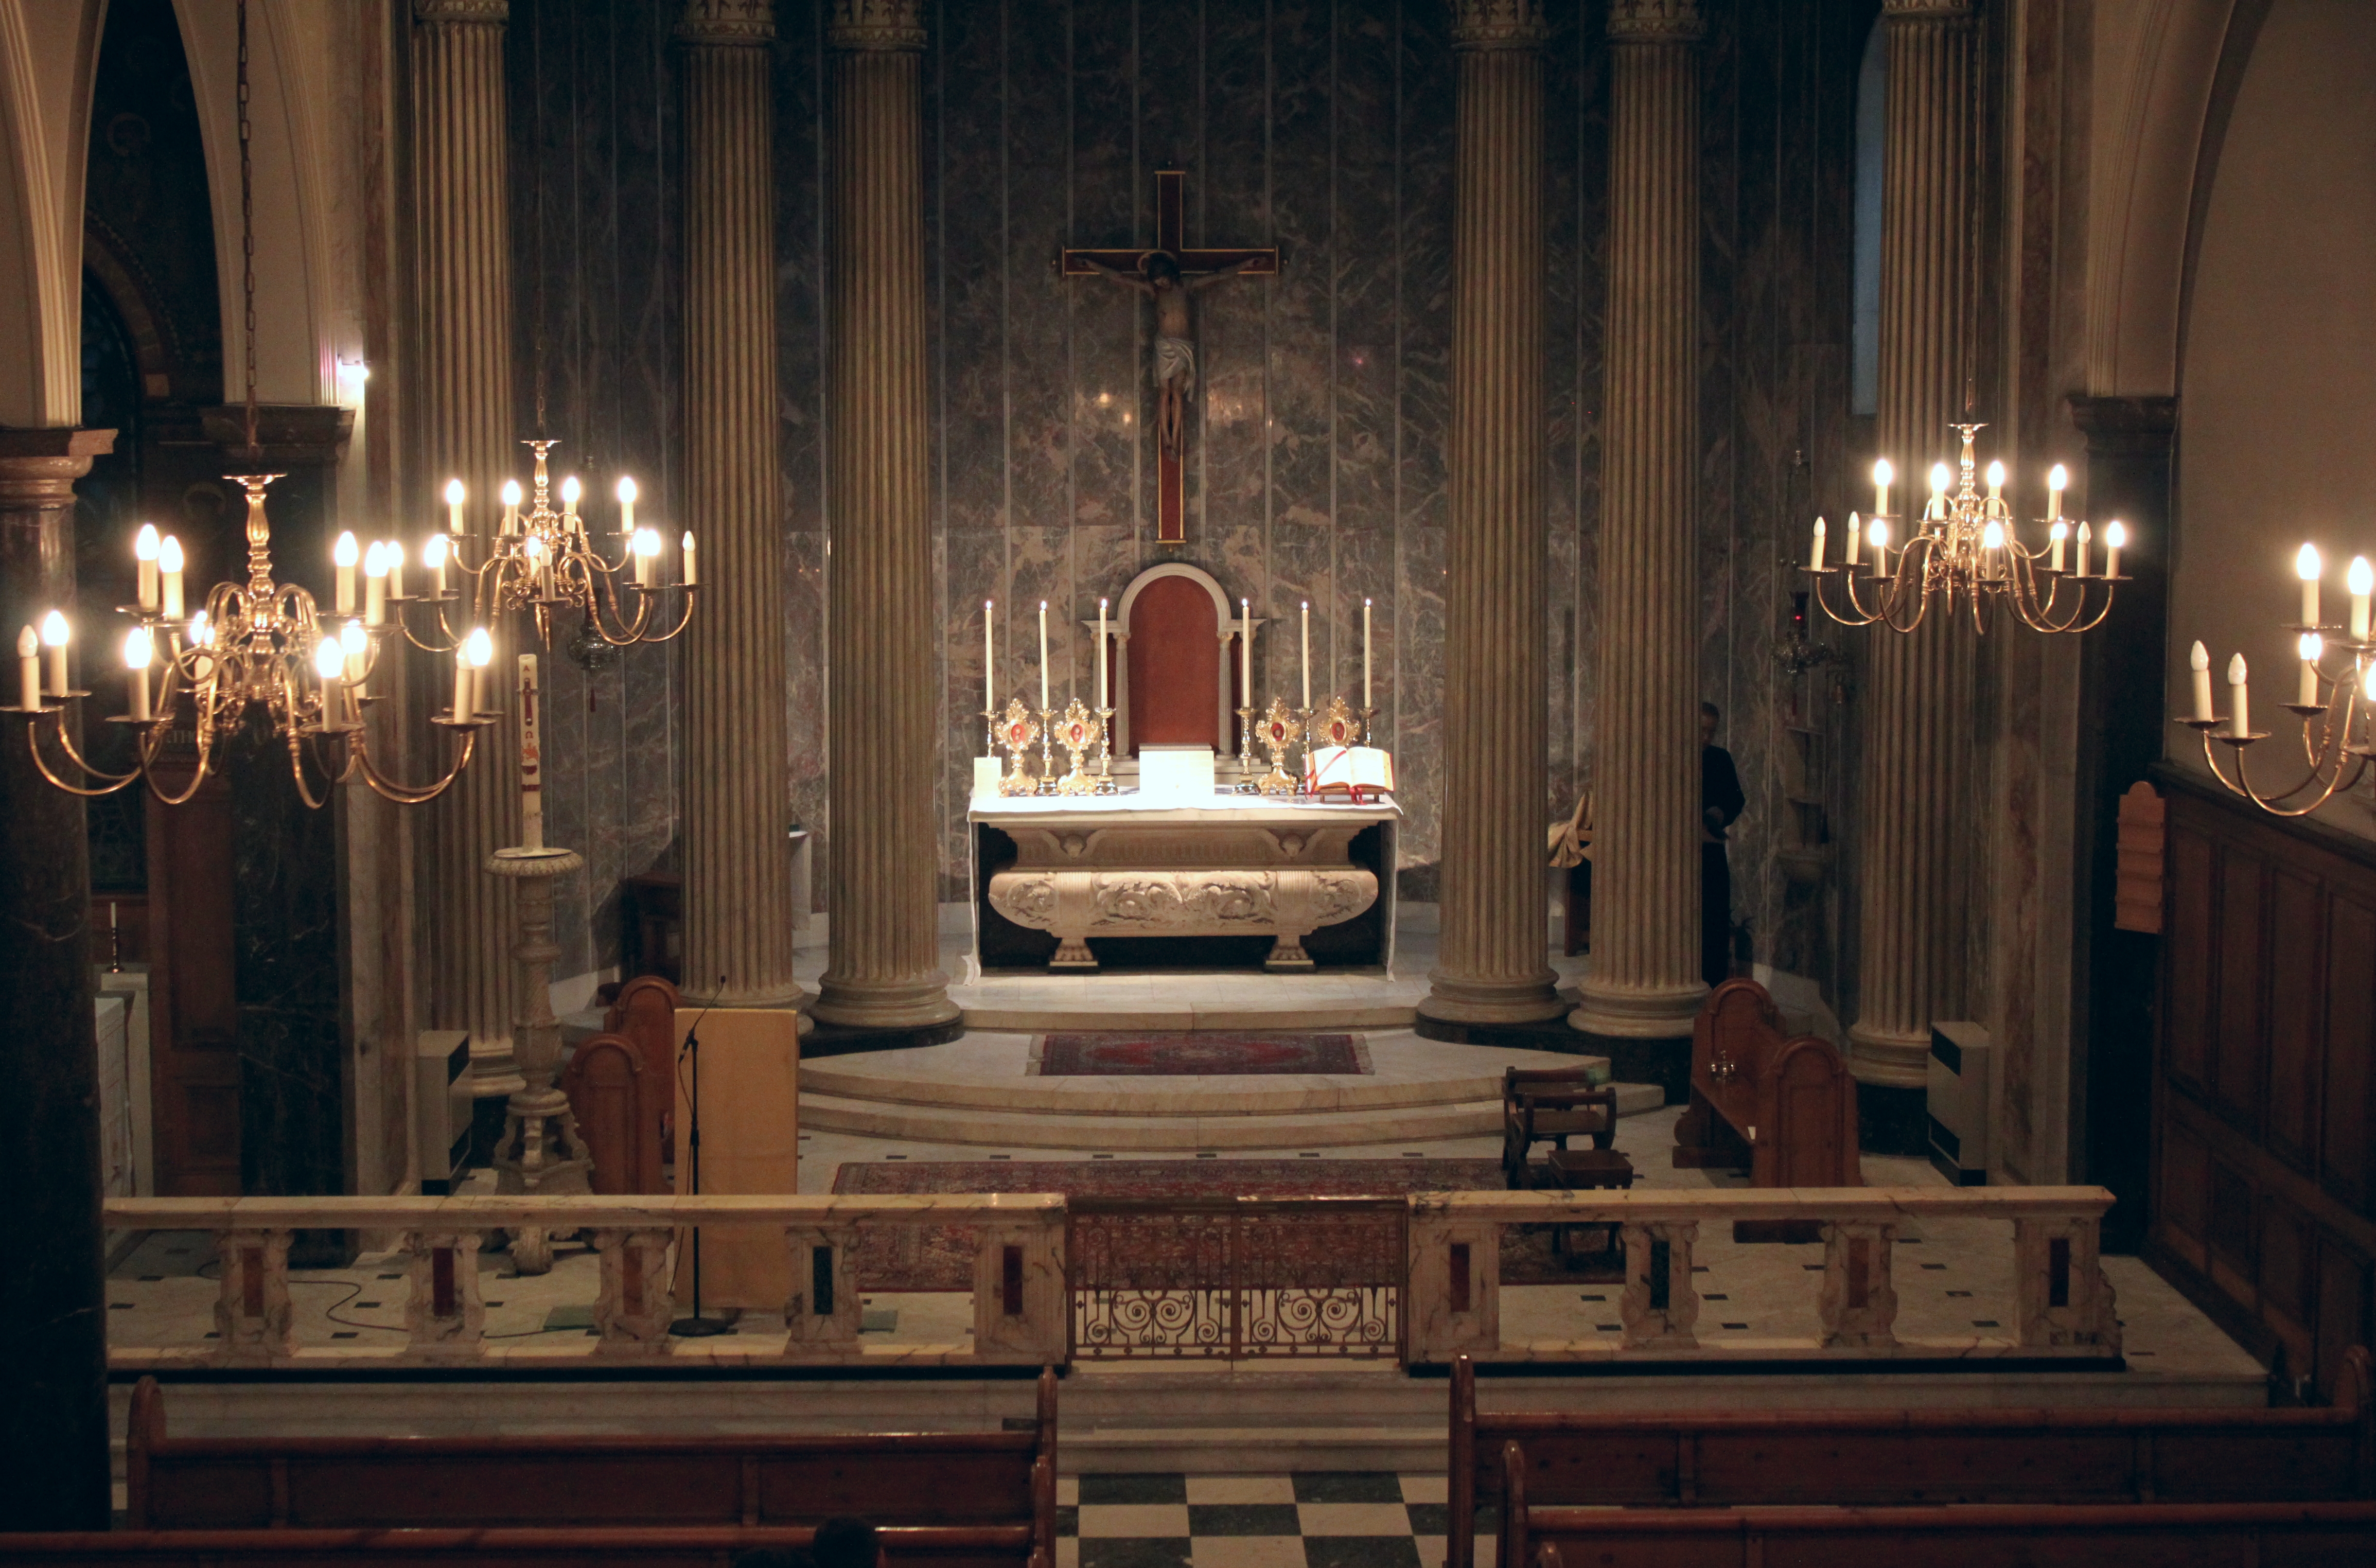 Archbishop of Westminster refuses permission for old rite Triduum